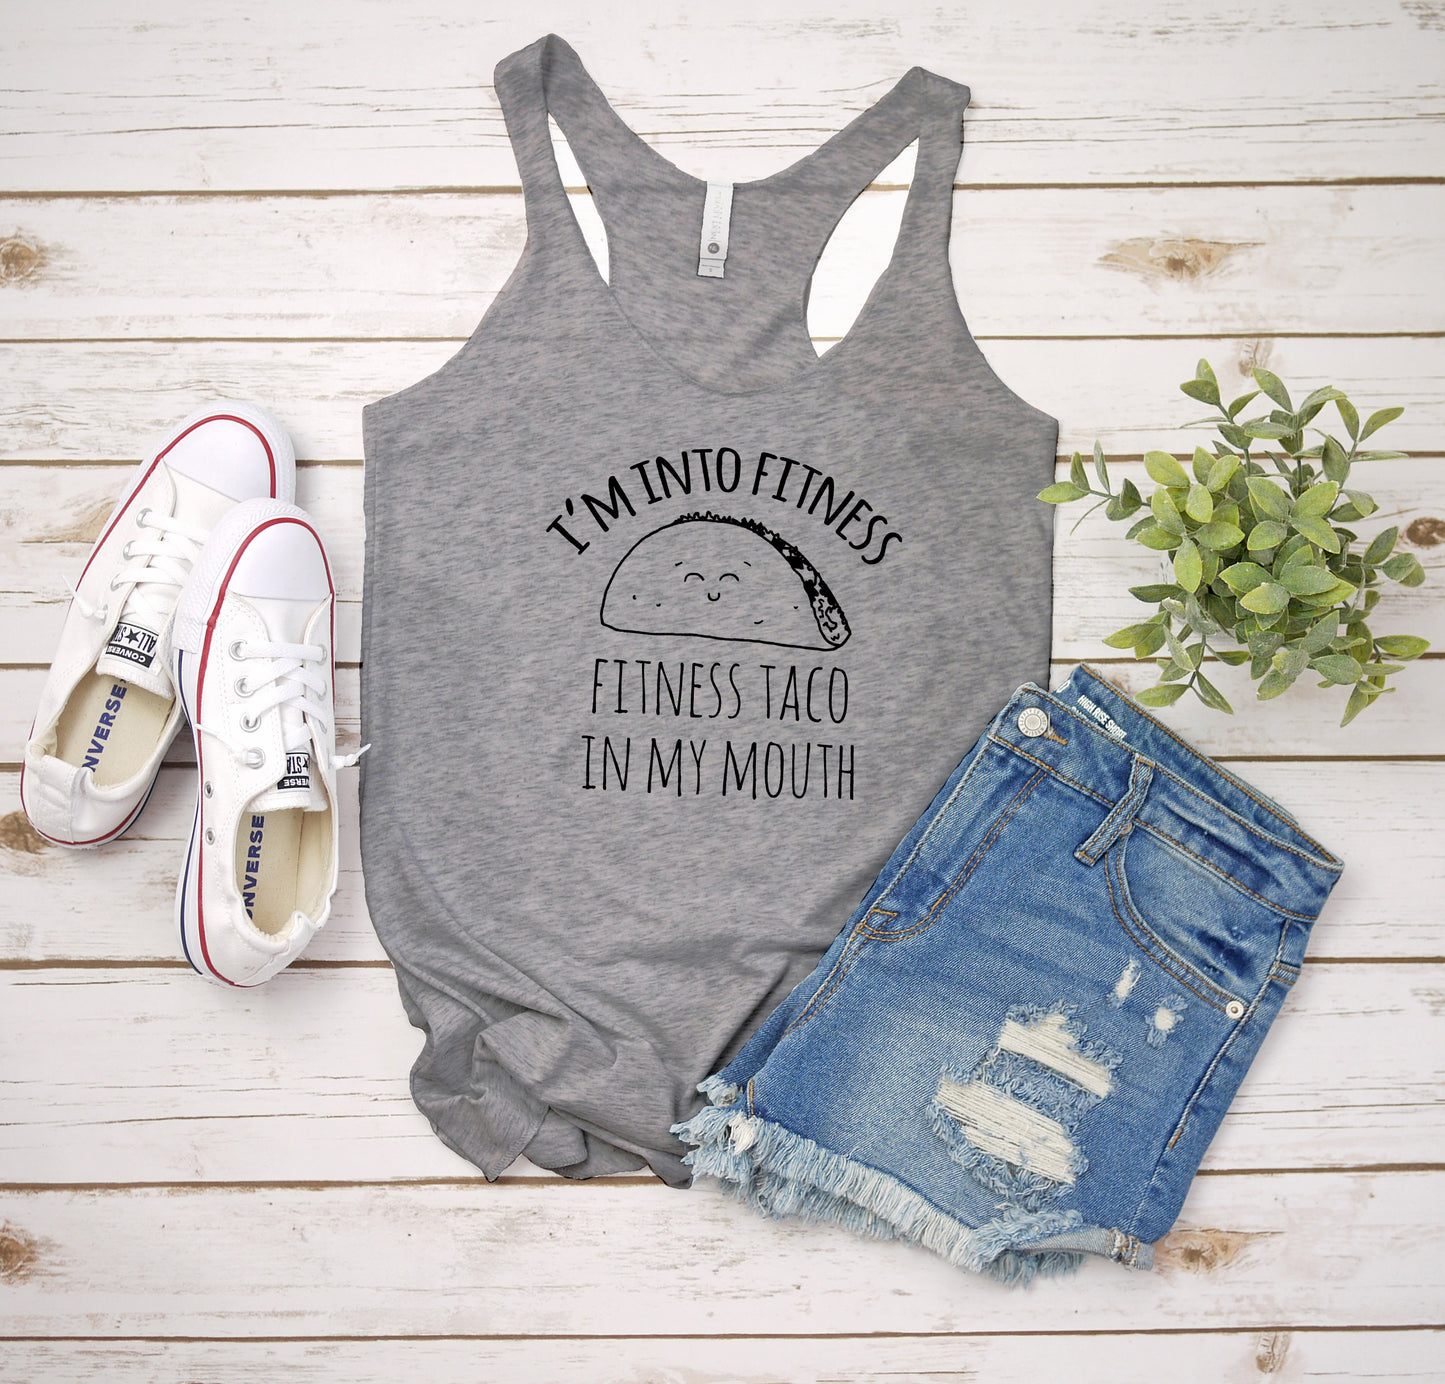 I'm Into Fitness, Fitness Taco In My Mouth - Women's Tank - Heather Gray, Tahiti, or Envy